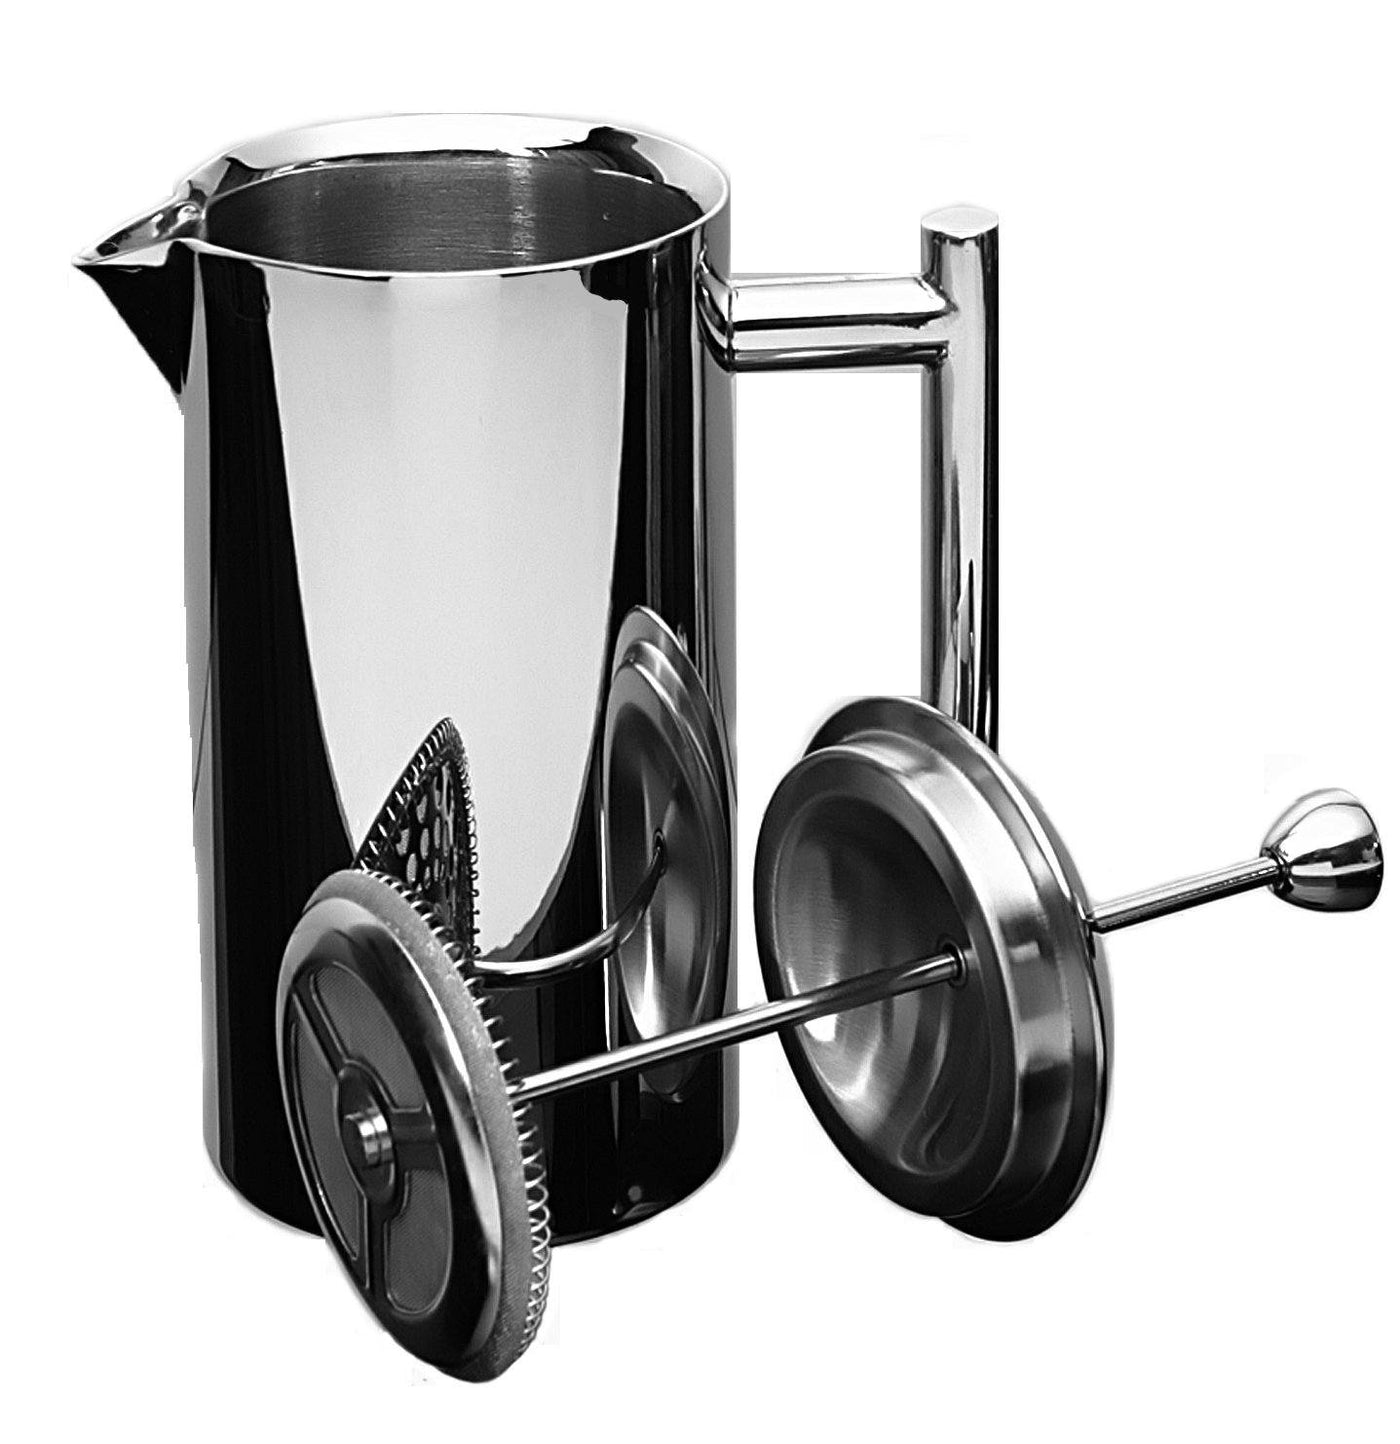 French Press Coffee Maker Double Wall Stainless Steel 1L – We Fill